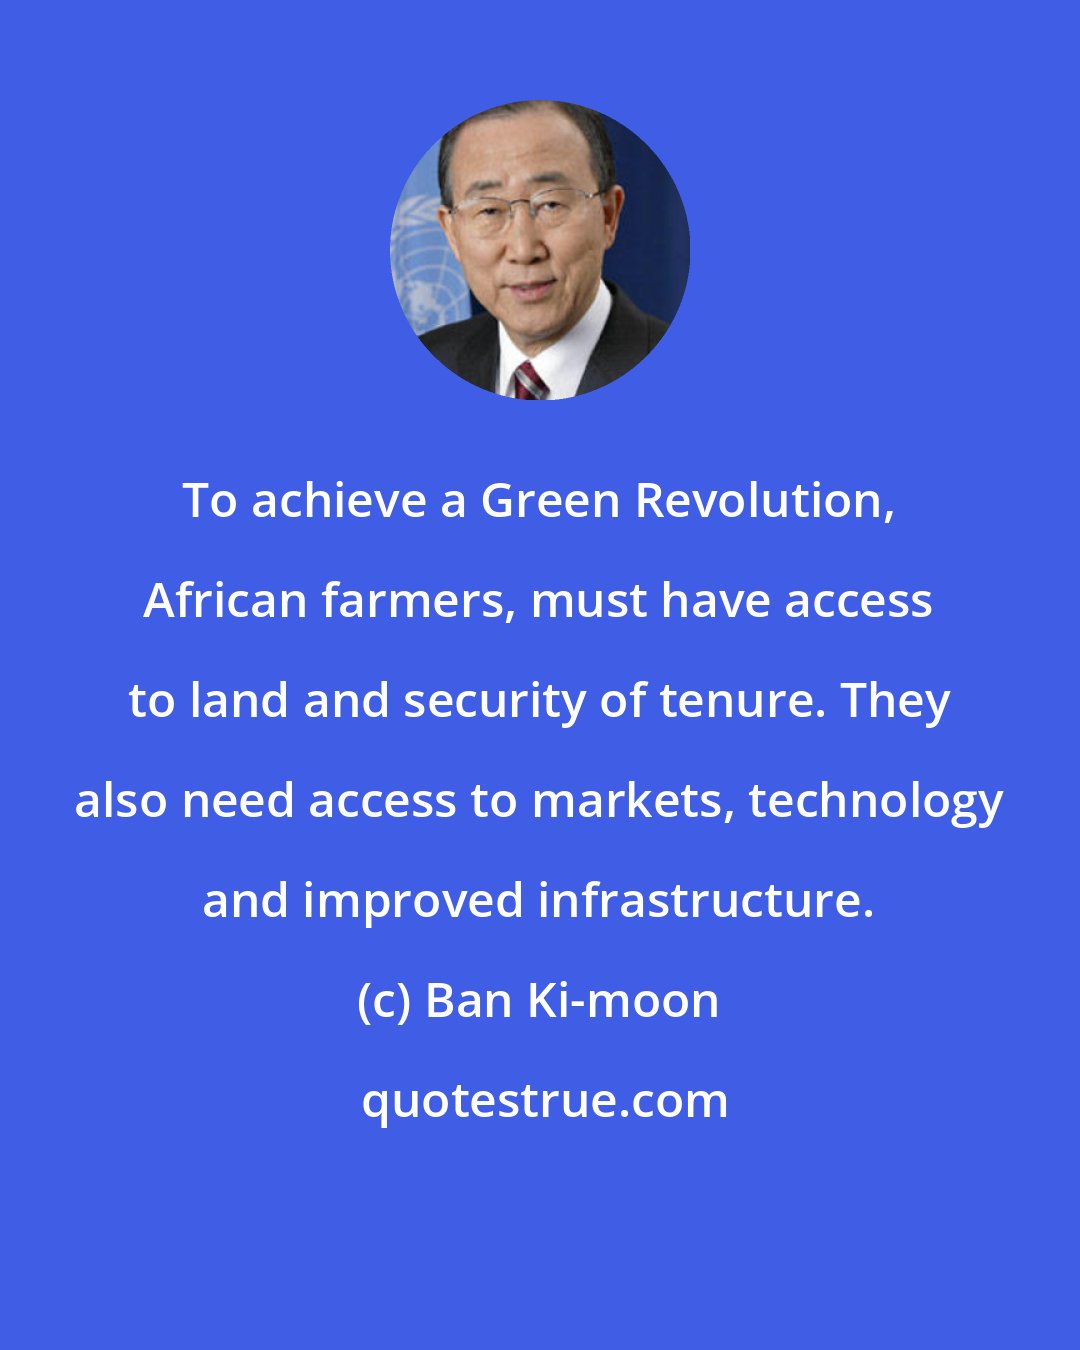 Ban Ki-moon: To achieve a Green Revolution, African farmers, must have access to land and security of tenure. They also need access to markets, technology and improved infrastructure.